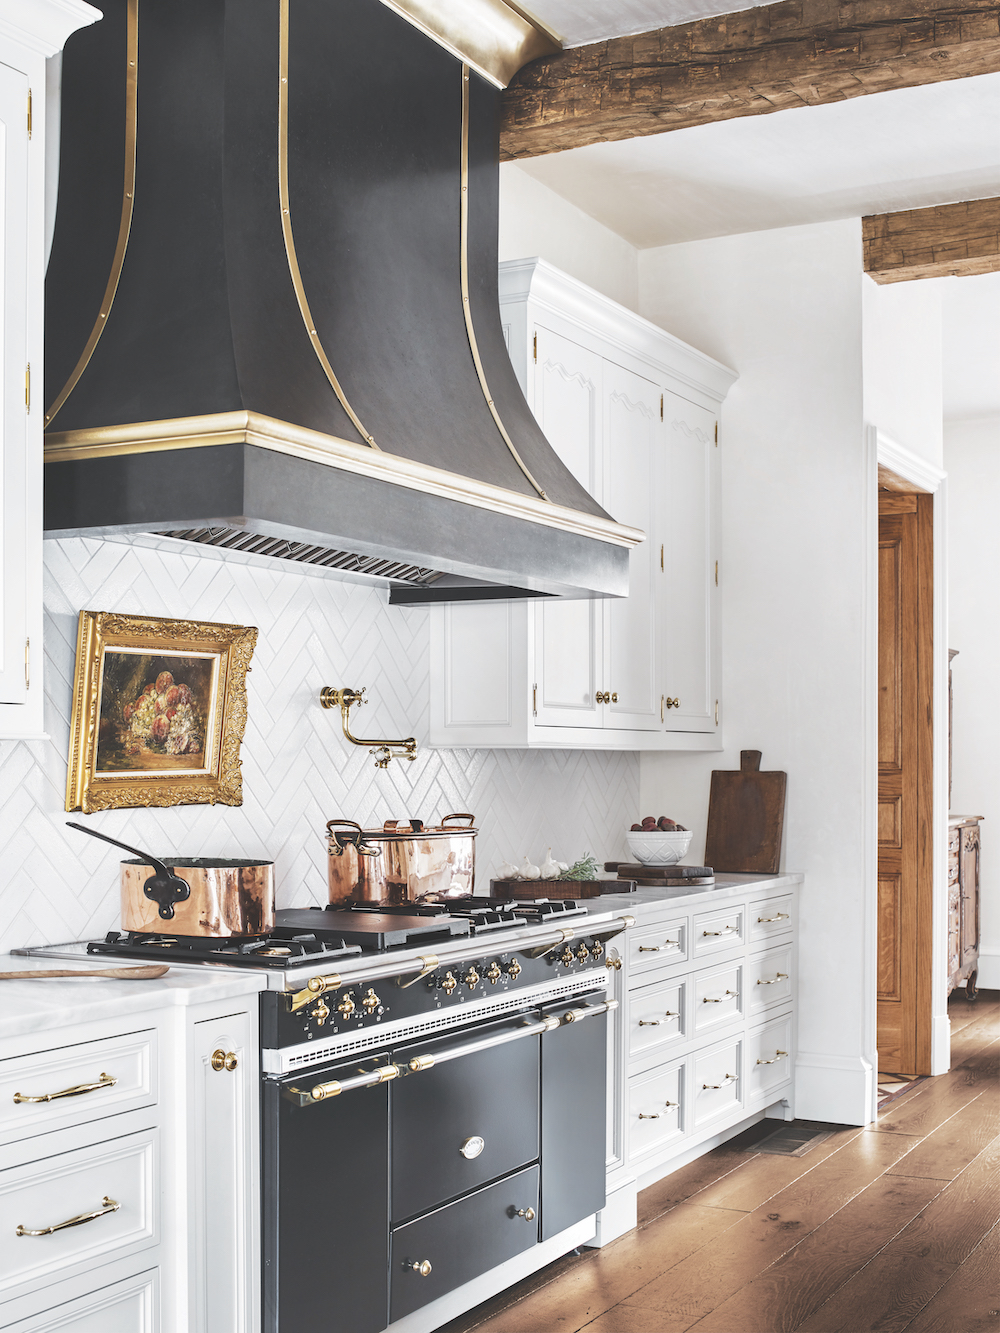 The Aurore Range Hood by Francois & Co in open kitchen with white kitchen cabinets and wood beams